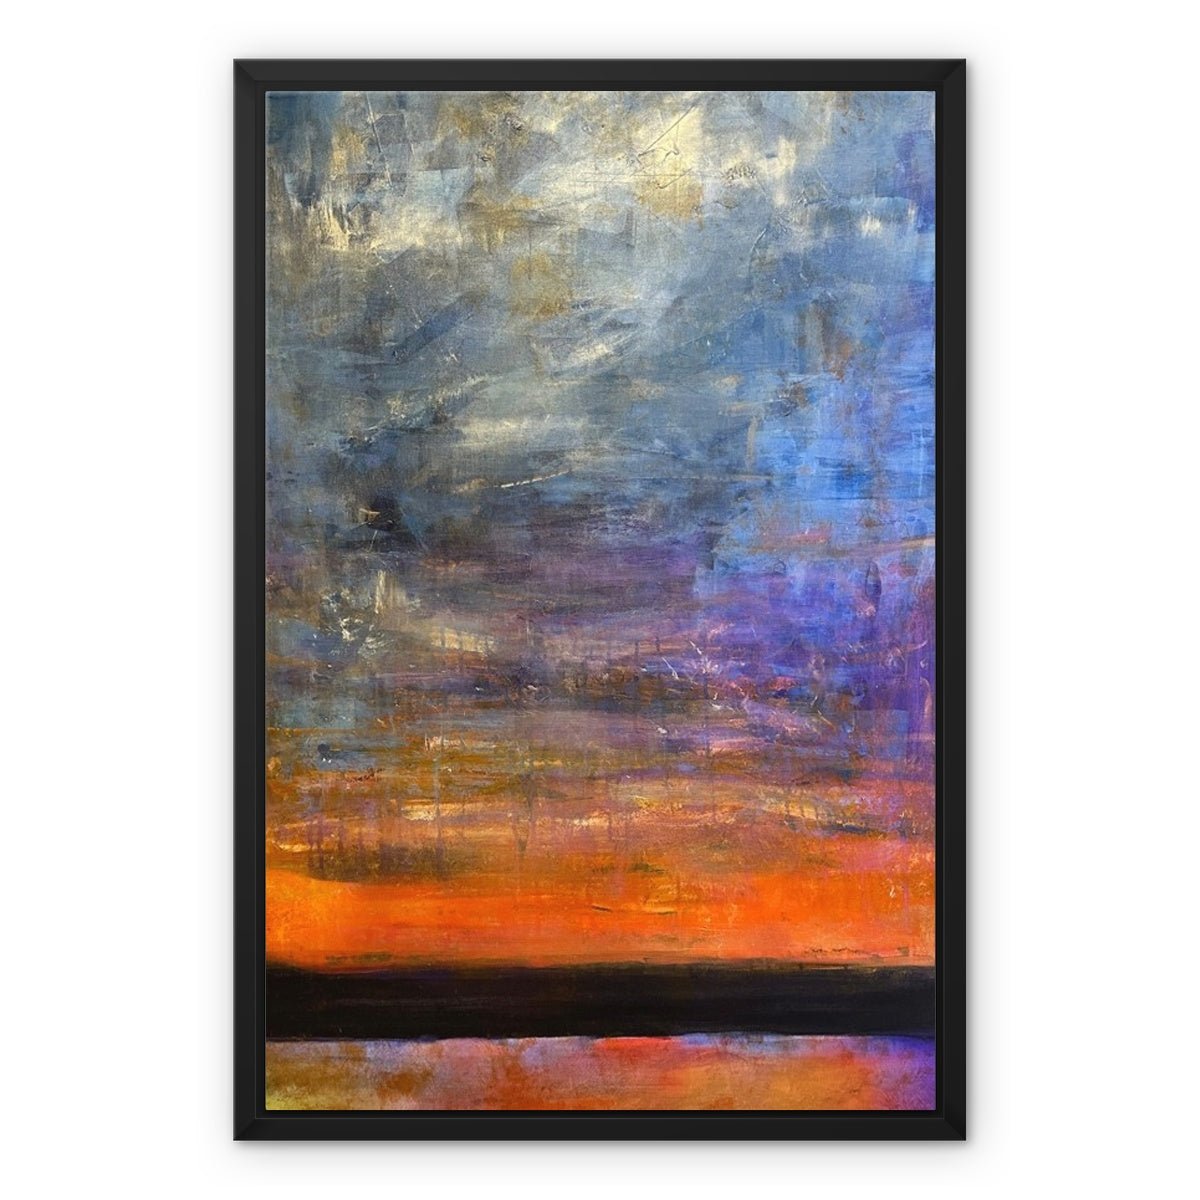 Horizon Dreams Abstract Painting | Framed Canvas From Scotland-Floating Framed Canvas Prints-Abstract & Impressionistic Art Gallery-18"x24"-Black Frame-Paintings, Prints, Homeware, Art Gifts From Scotland By Scottish Artist Kevin Hunter